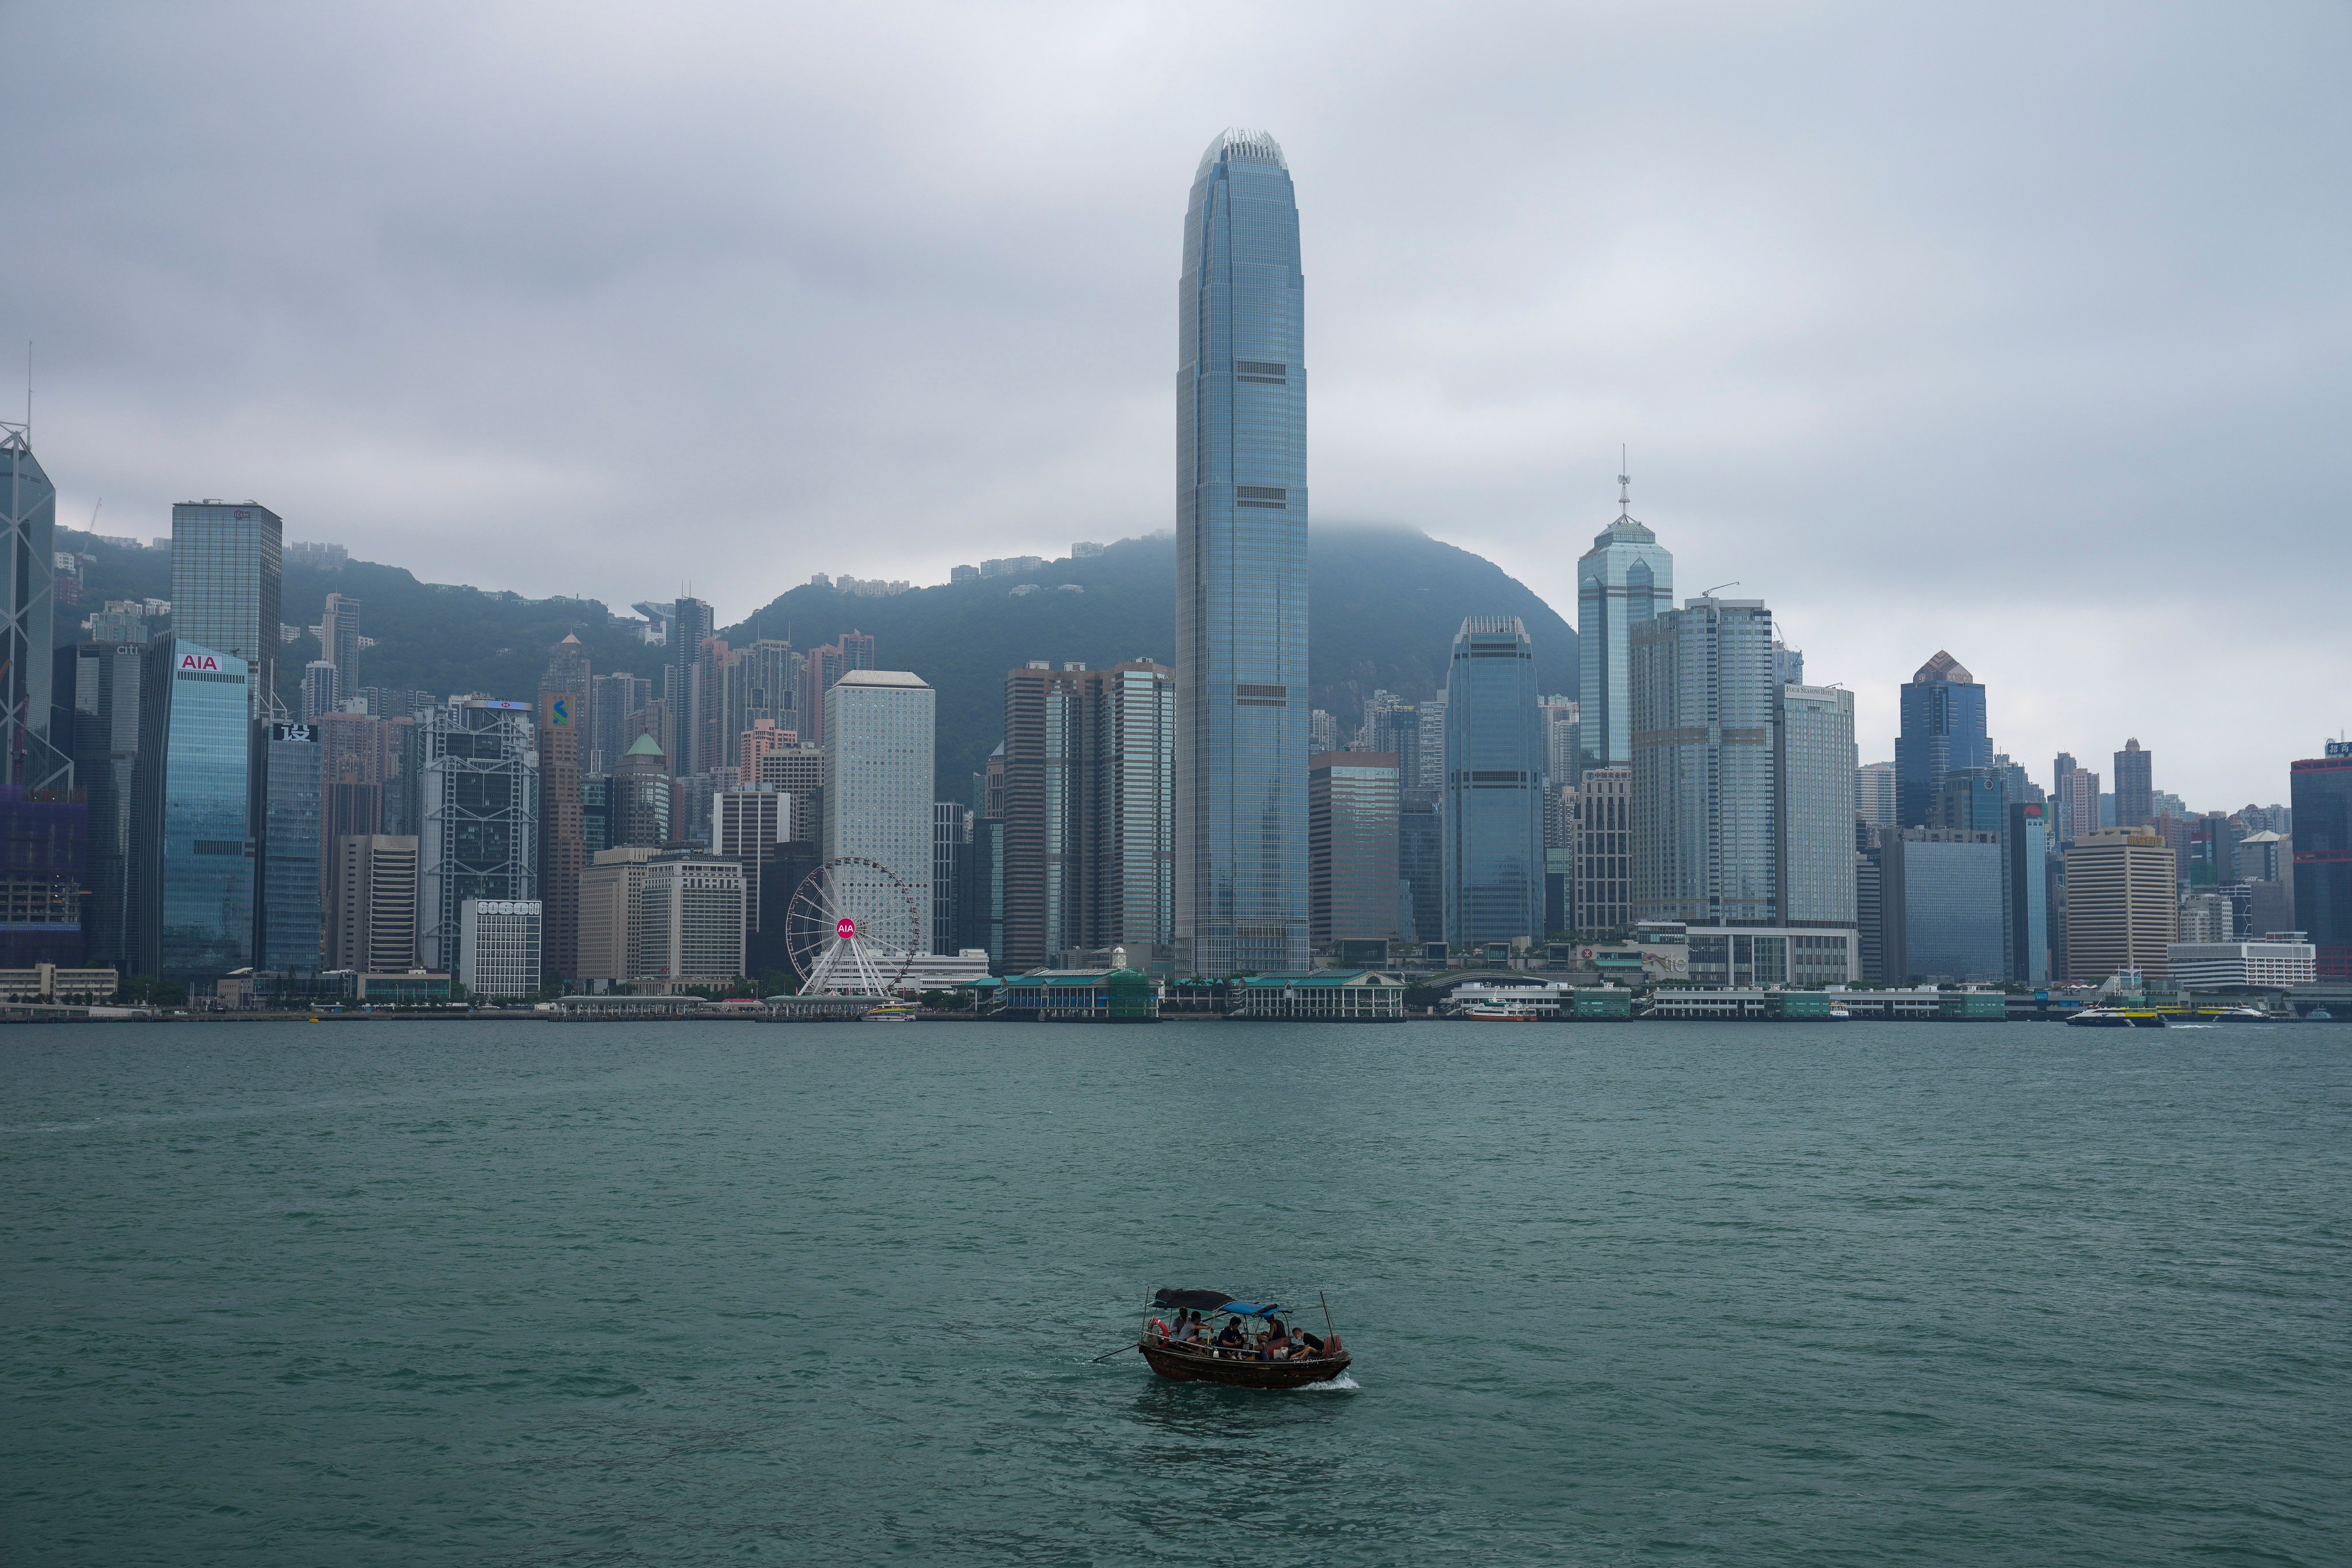 Hong Kong authorities have said the city’s religious freedoms remain intact despite criticism from the US. Photo: Sam Tsang